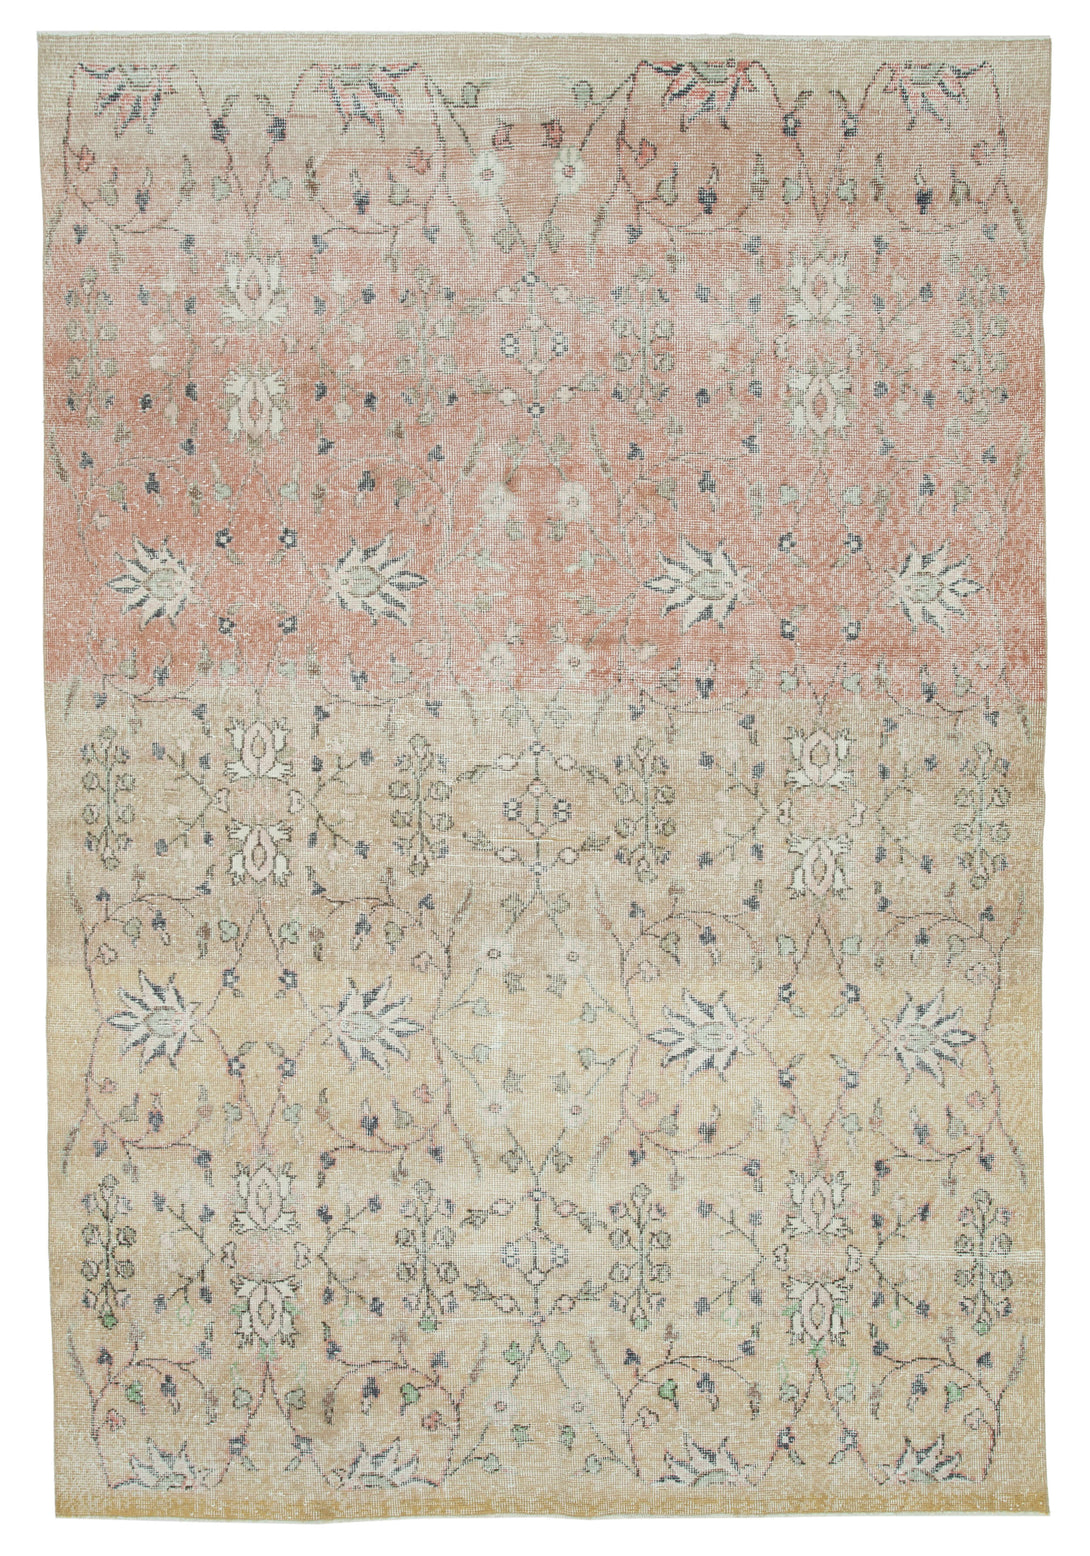 Handmade White Wash Area Rug > Design# OL-AC-25335 > Size: 7'-0" x 10'-2", Carpet Culture Rugs, Handmade Rugs, NYC Rugs, New Rugs, Shop Rugs, Rug Store, Outlet Rugs, SoHo Rugs, Rugs in USA